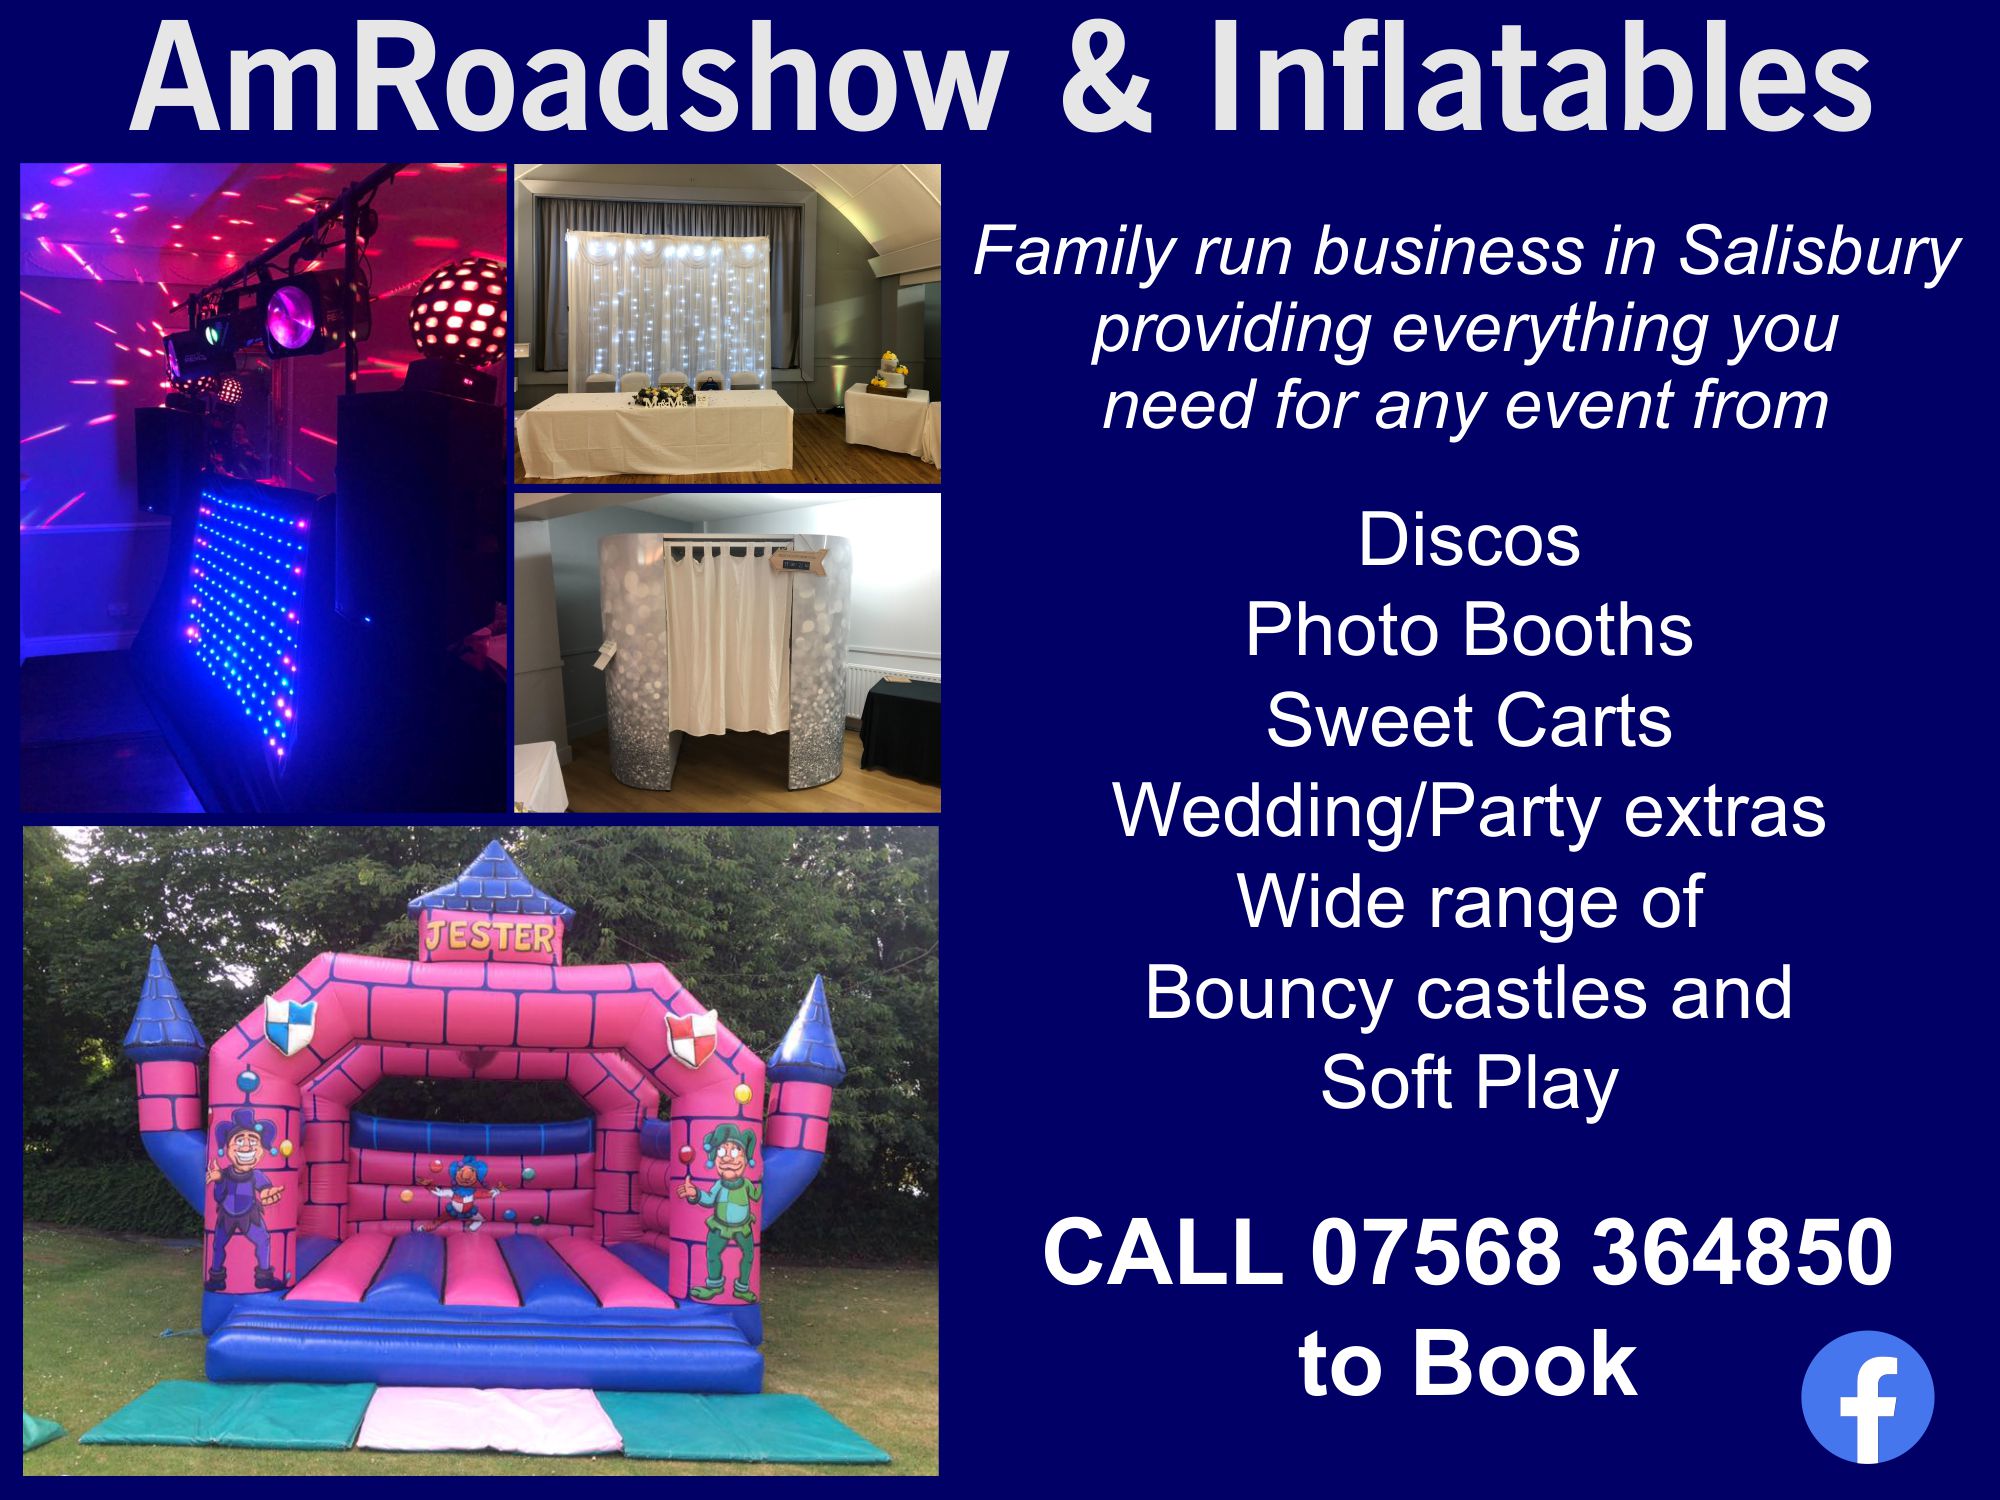 AM Roadshow and Inflatables